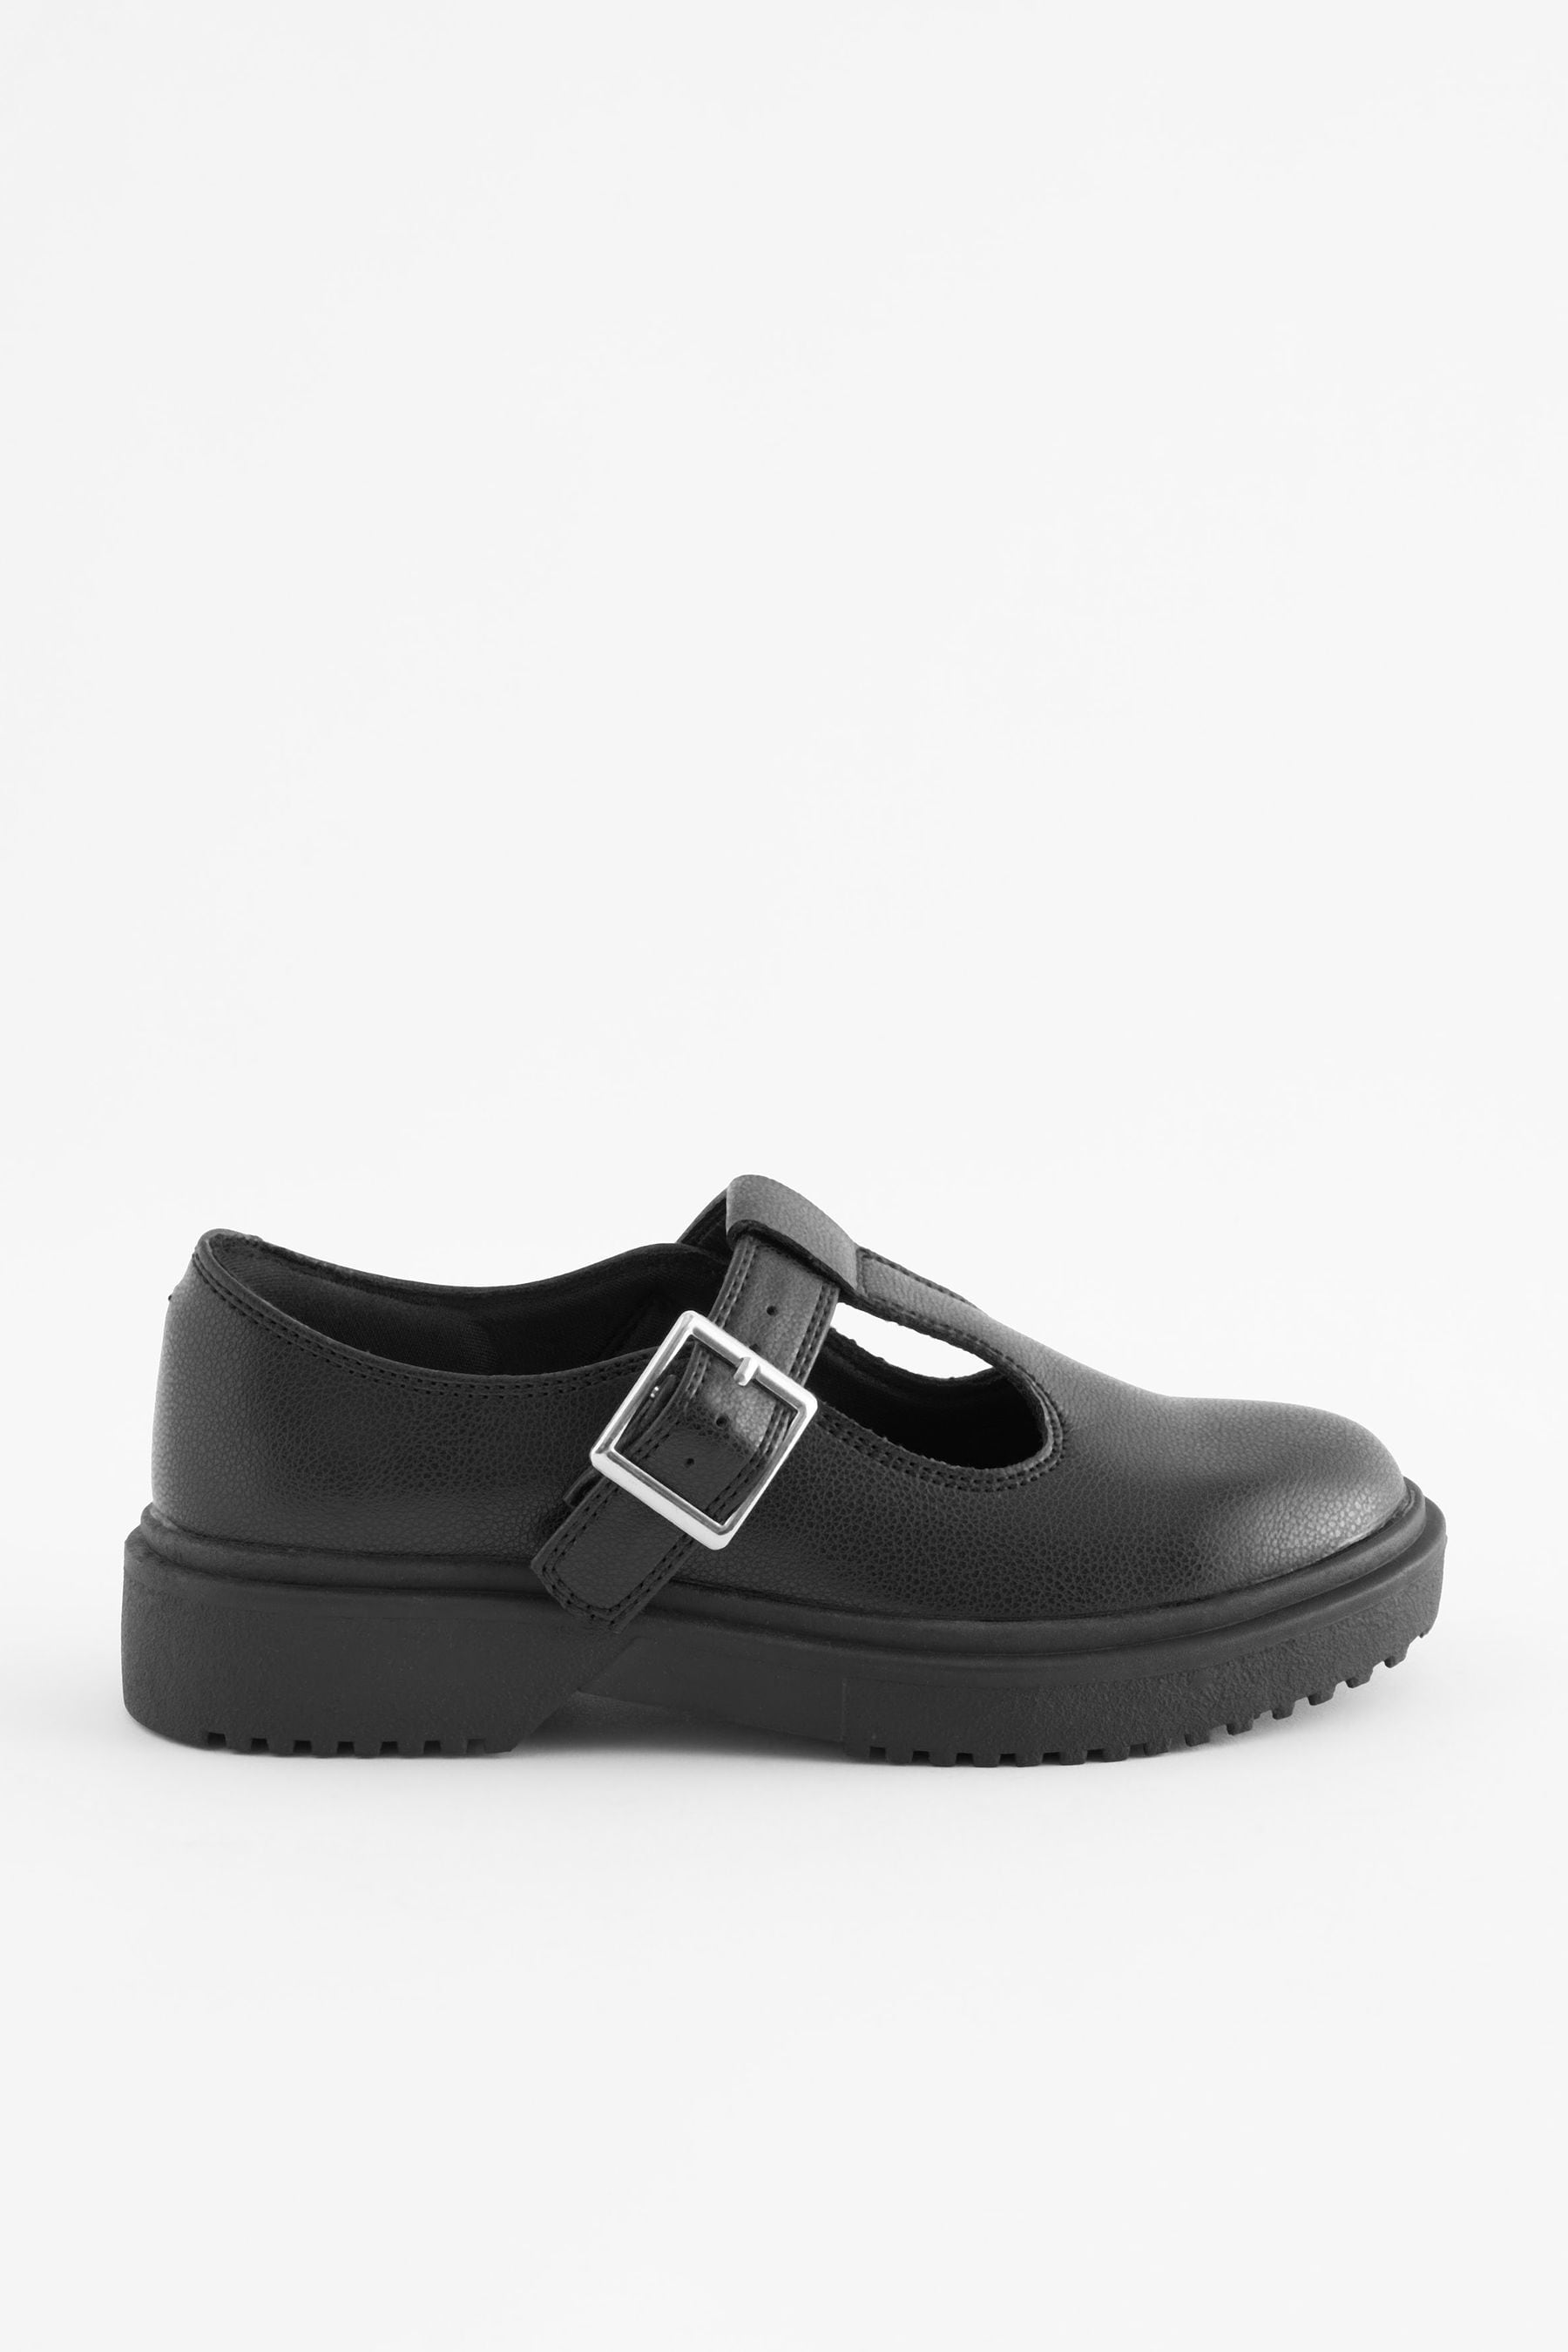 Buy Black School Chunky Sole T-Bar Shoes from the Next UK online shop